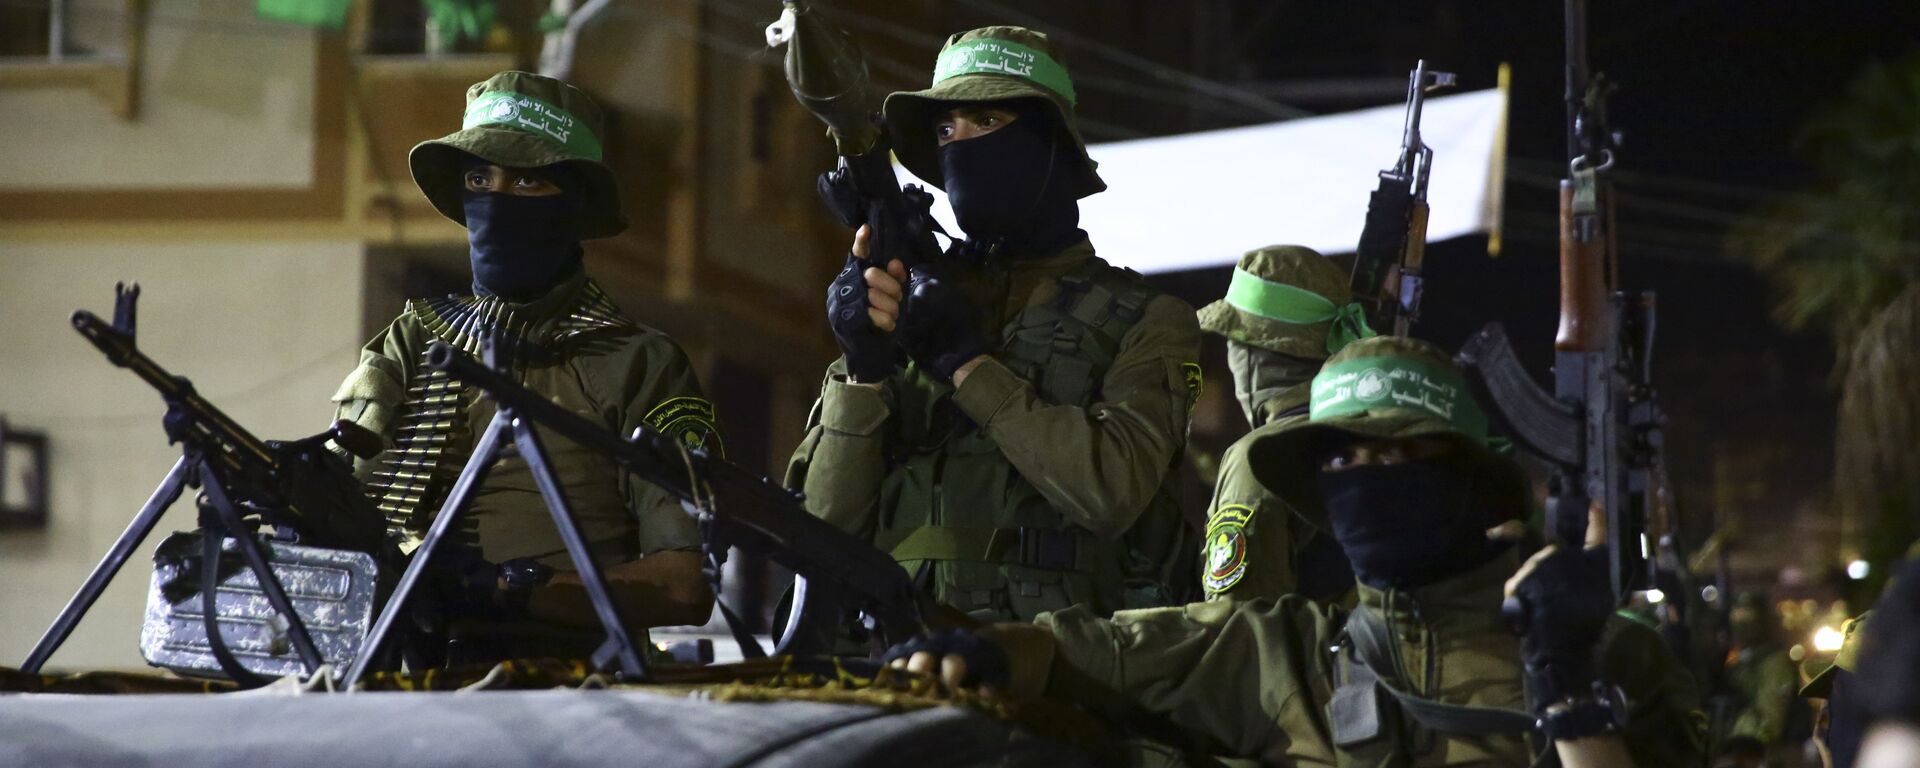 Masked militants from the Izzedine al-Qassam Brigades, a military wing of Hamas, ride vehicles during a rally marking Al-Quds, Jerusalem, Day in Nusseirat refugee camp, in the central Gaza Strip, Friday, June 23, 2017 - Sputnik International, 1920, 09.10.2023